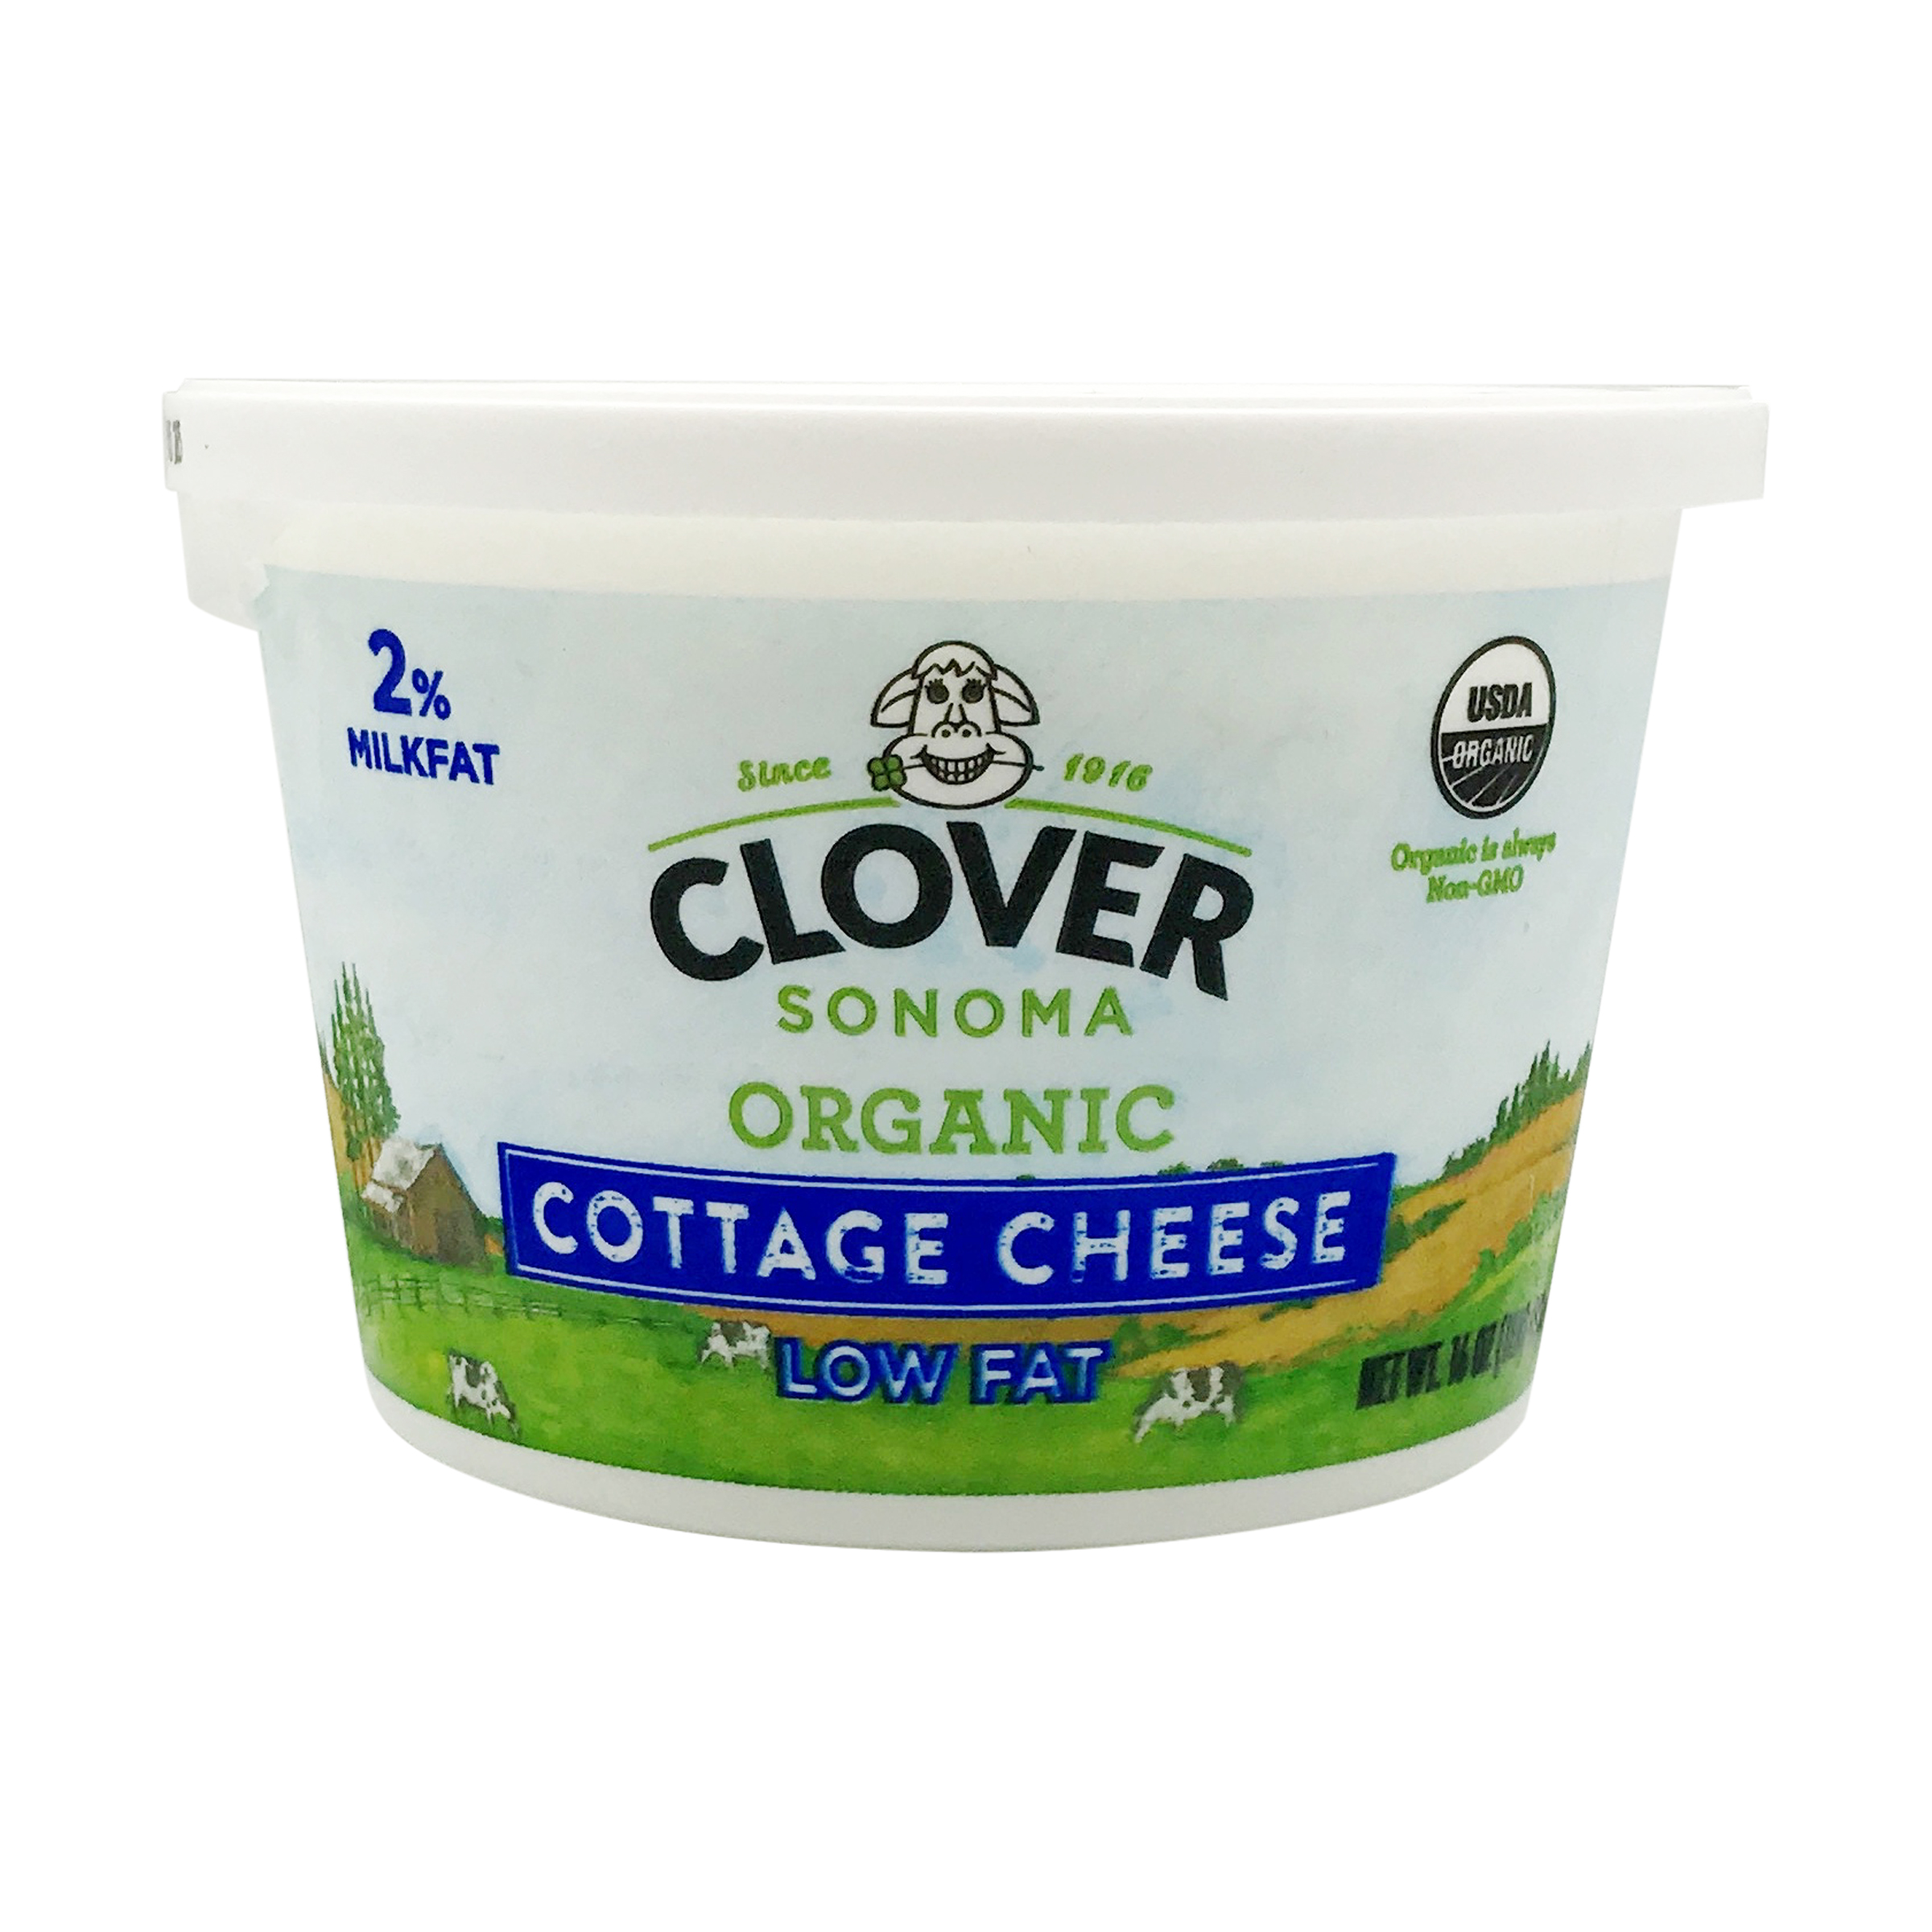 Organic Low Fat Cottage Cheese 16 Oz Clover Sonoma Whole Foods